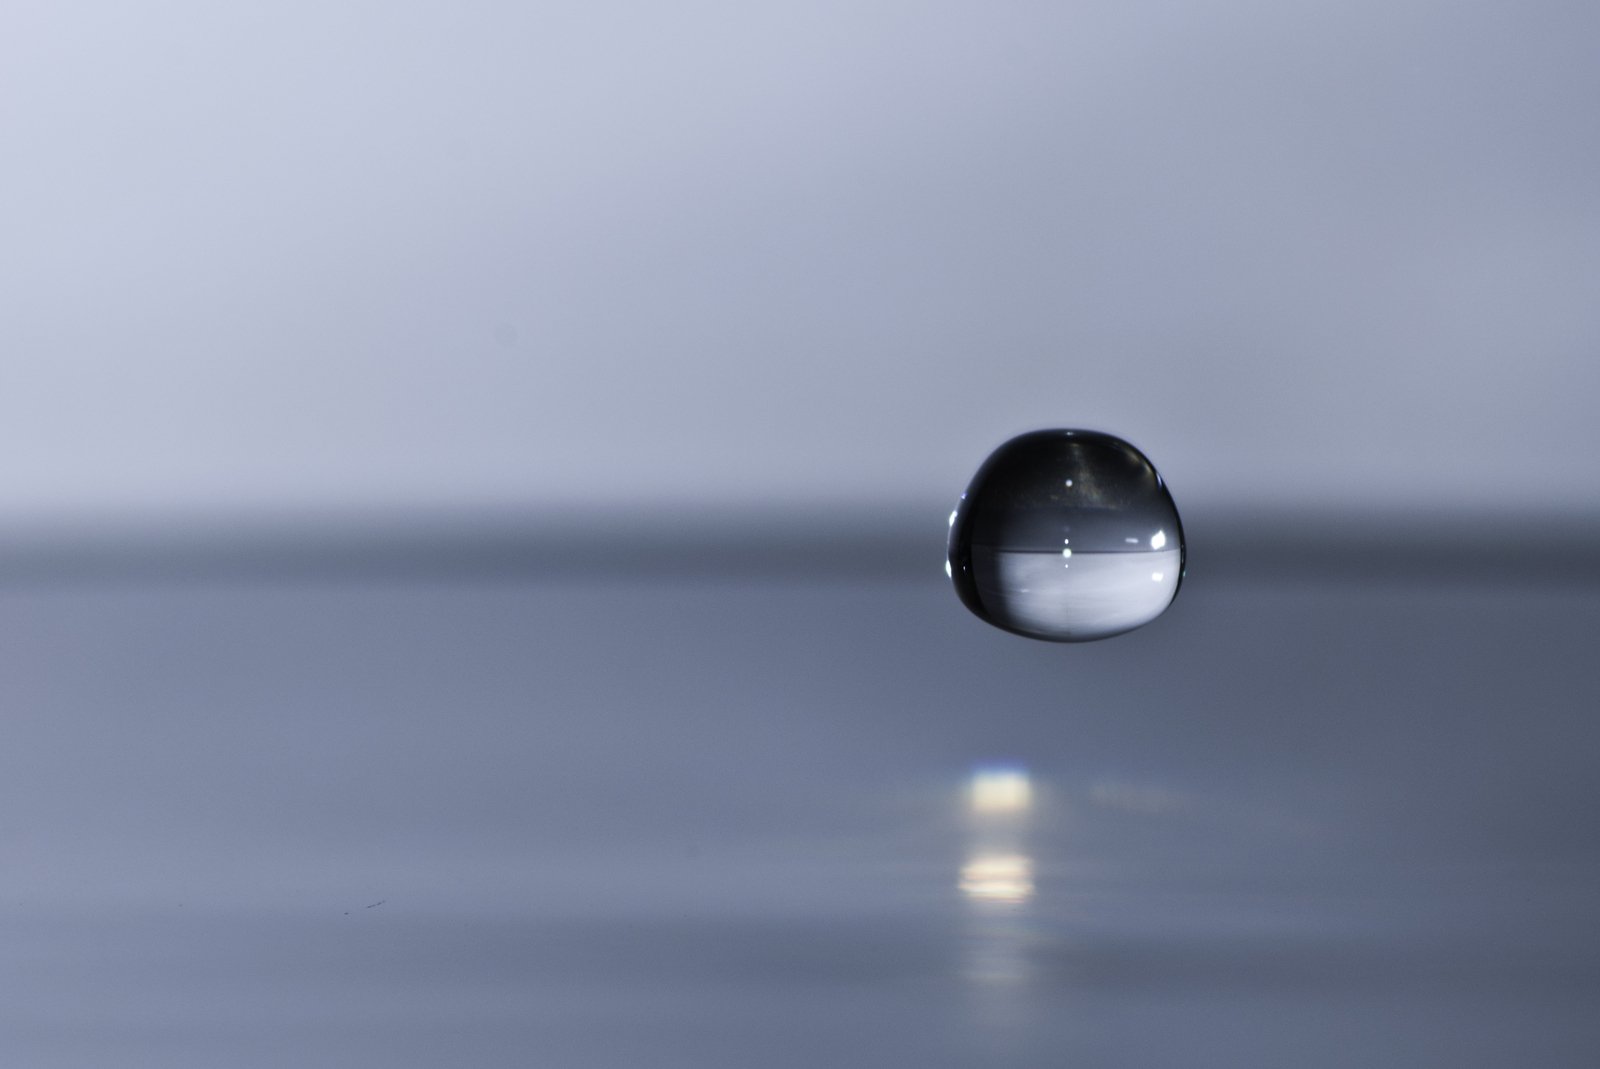 a view through a drop in water